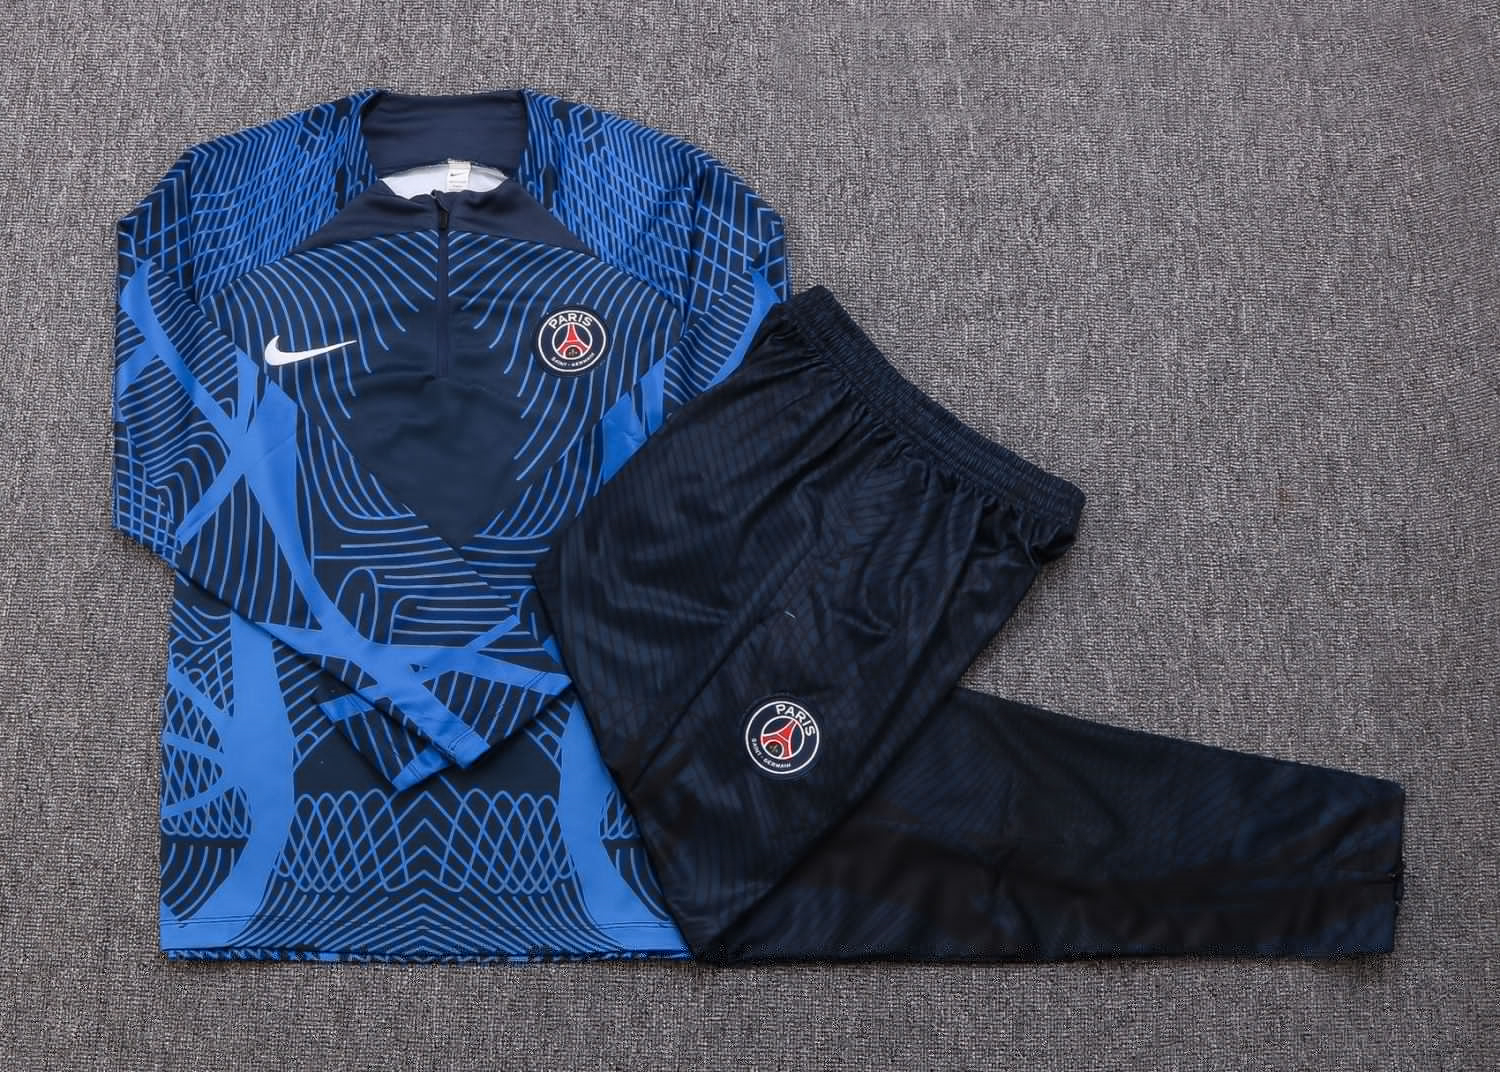 PSG Soccer Training Suit Royal 3D 2022/23 Youth